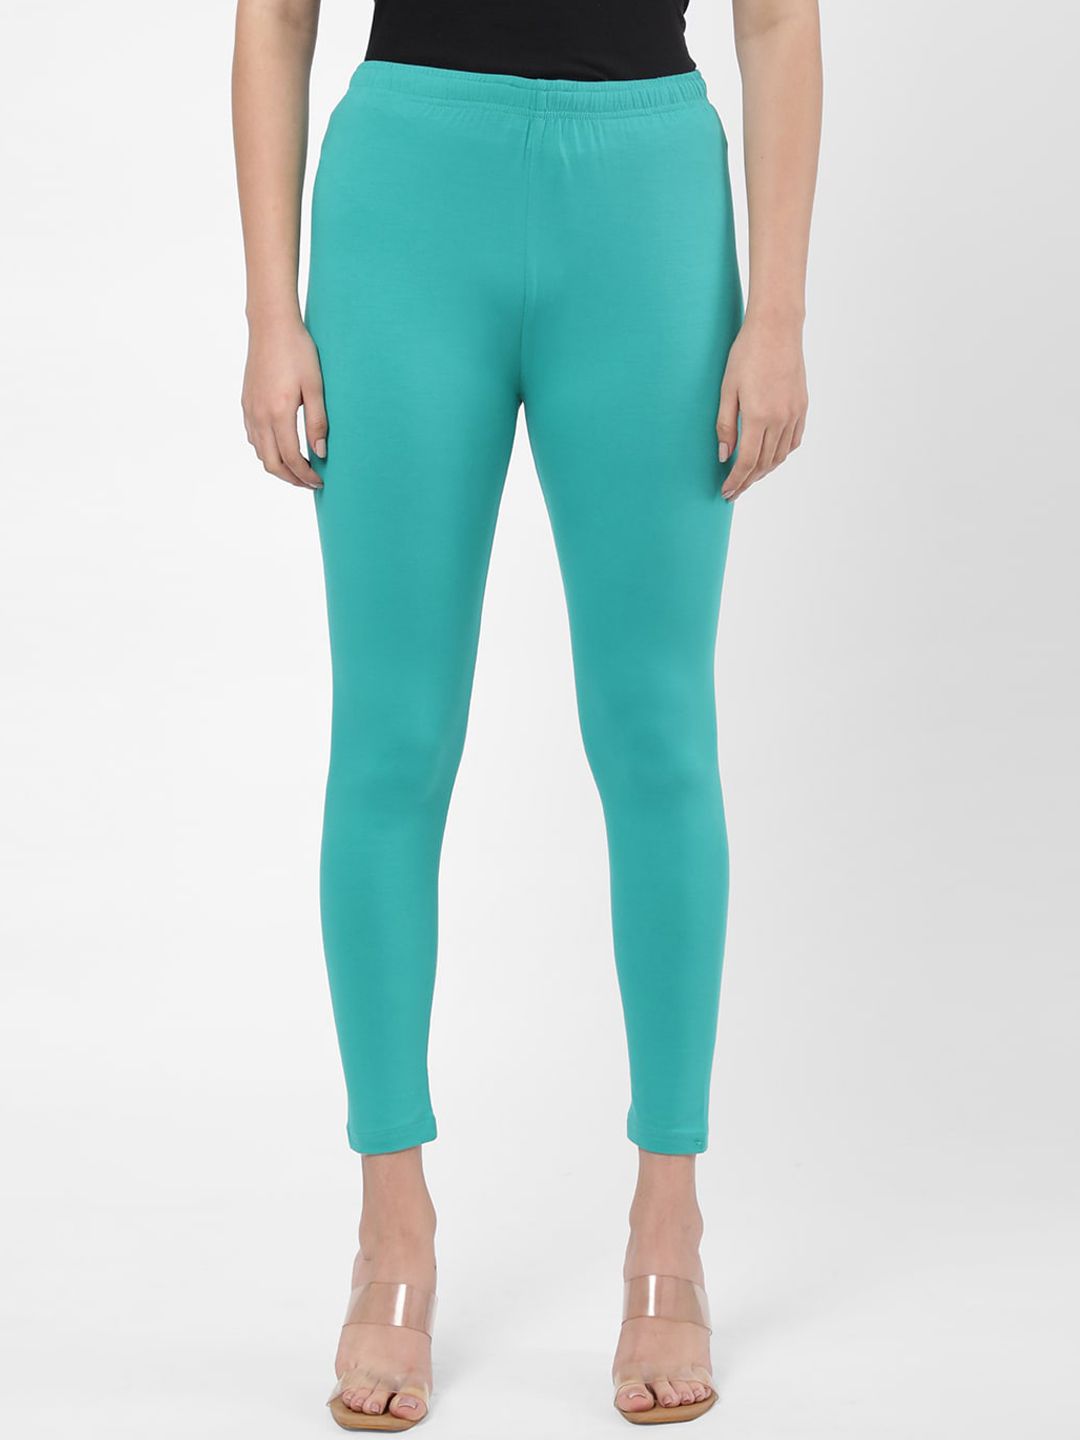 R&B Women Blue Solid Ankle-Length Leggings Price in India